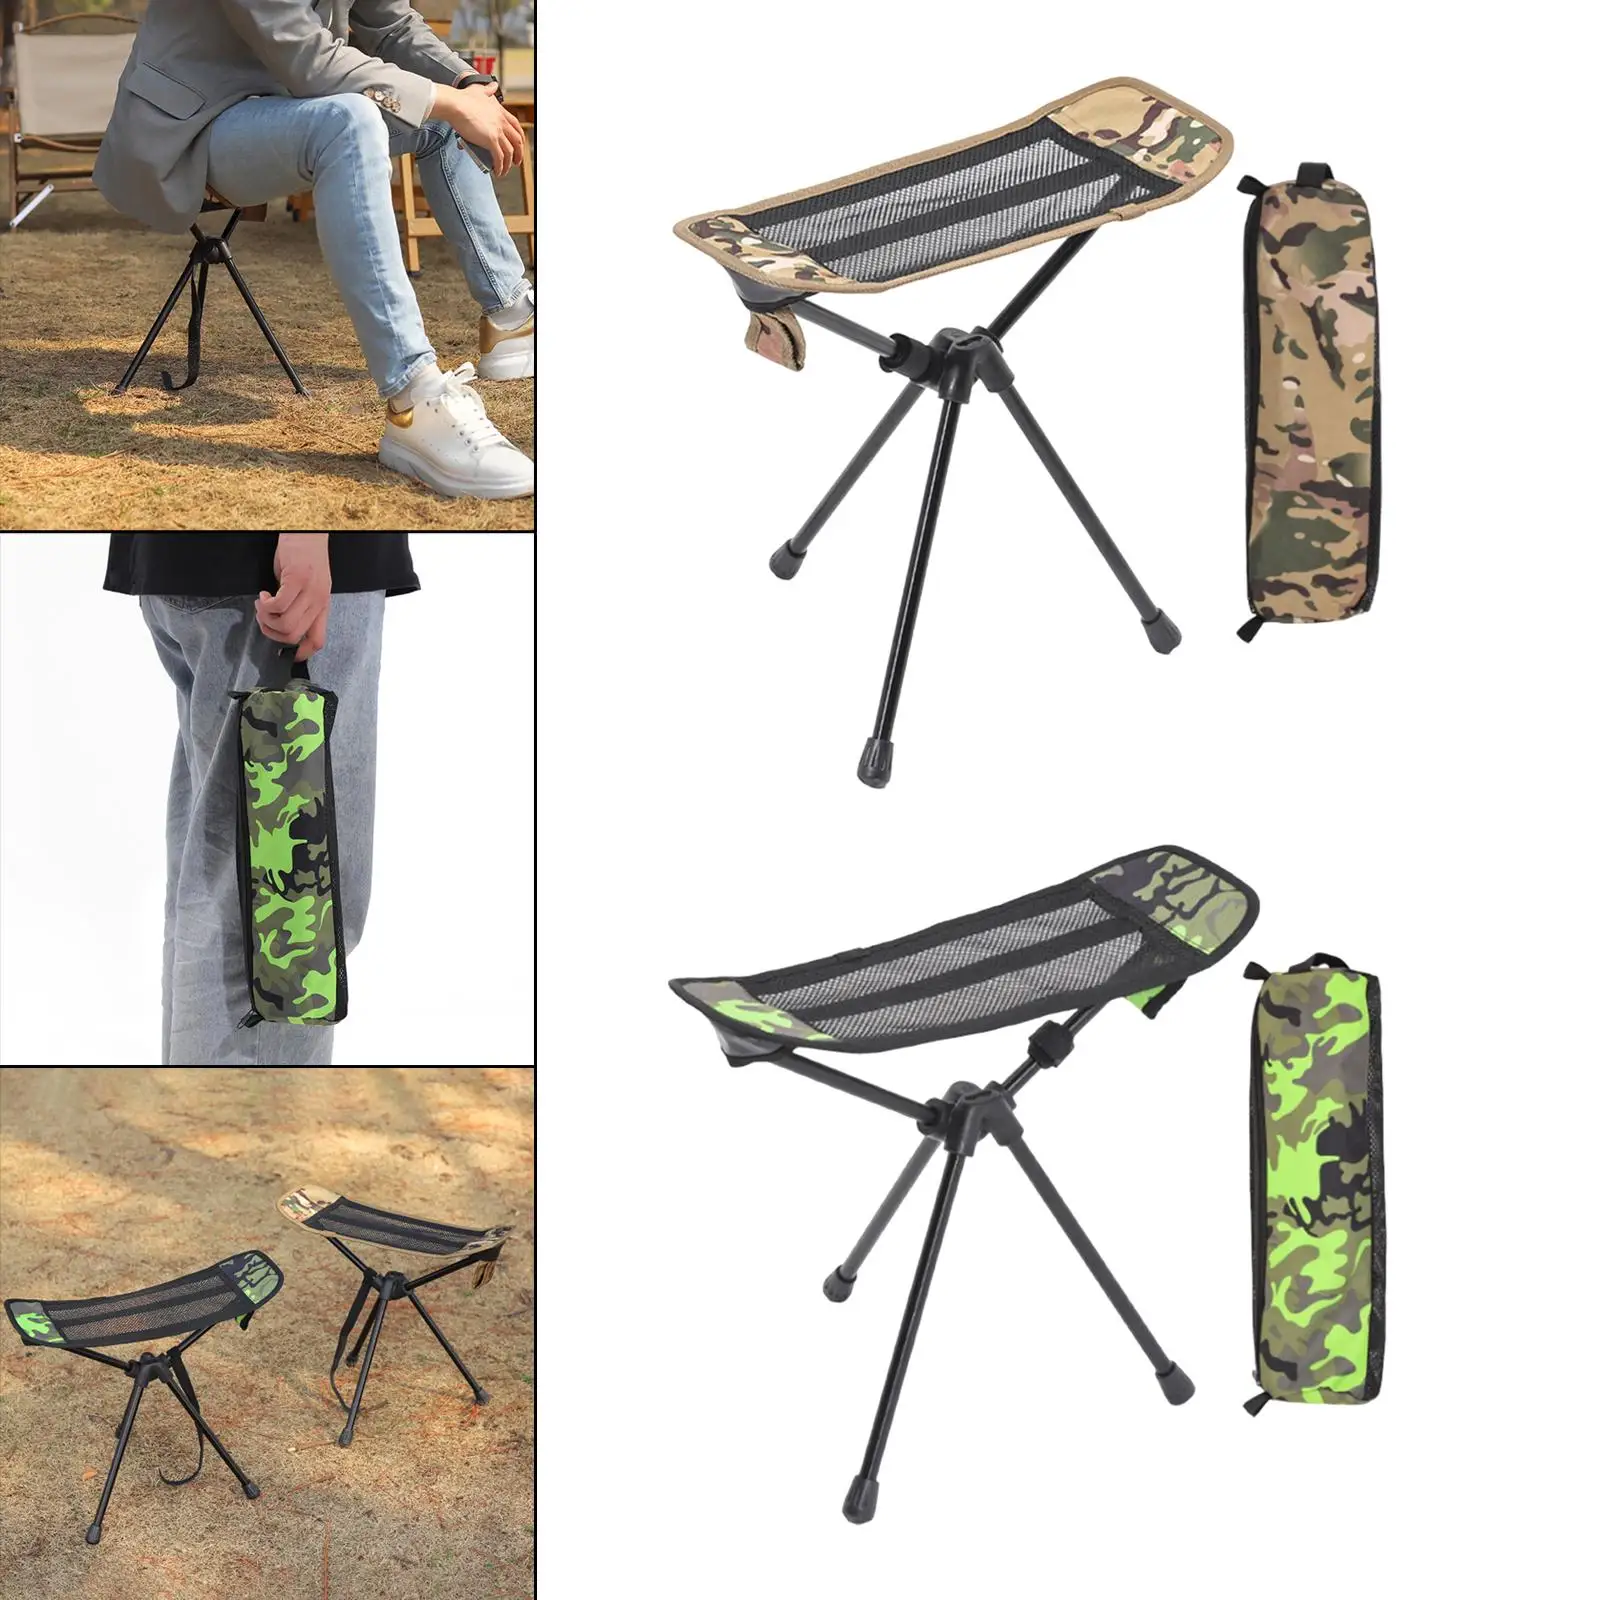 Collapsible Footstool Tripod Foot Rest Stool for Beach Travel Camping